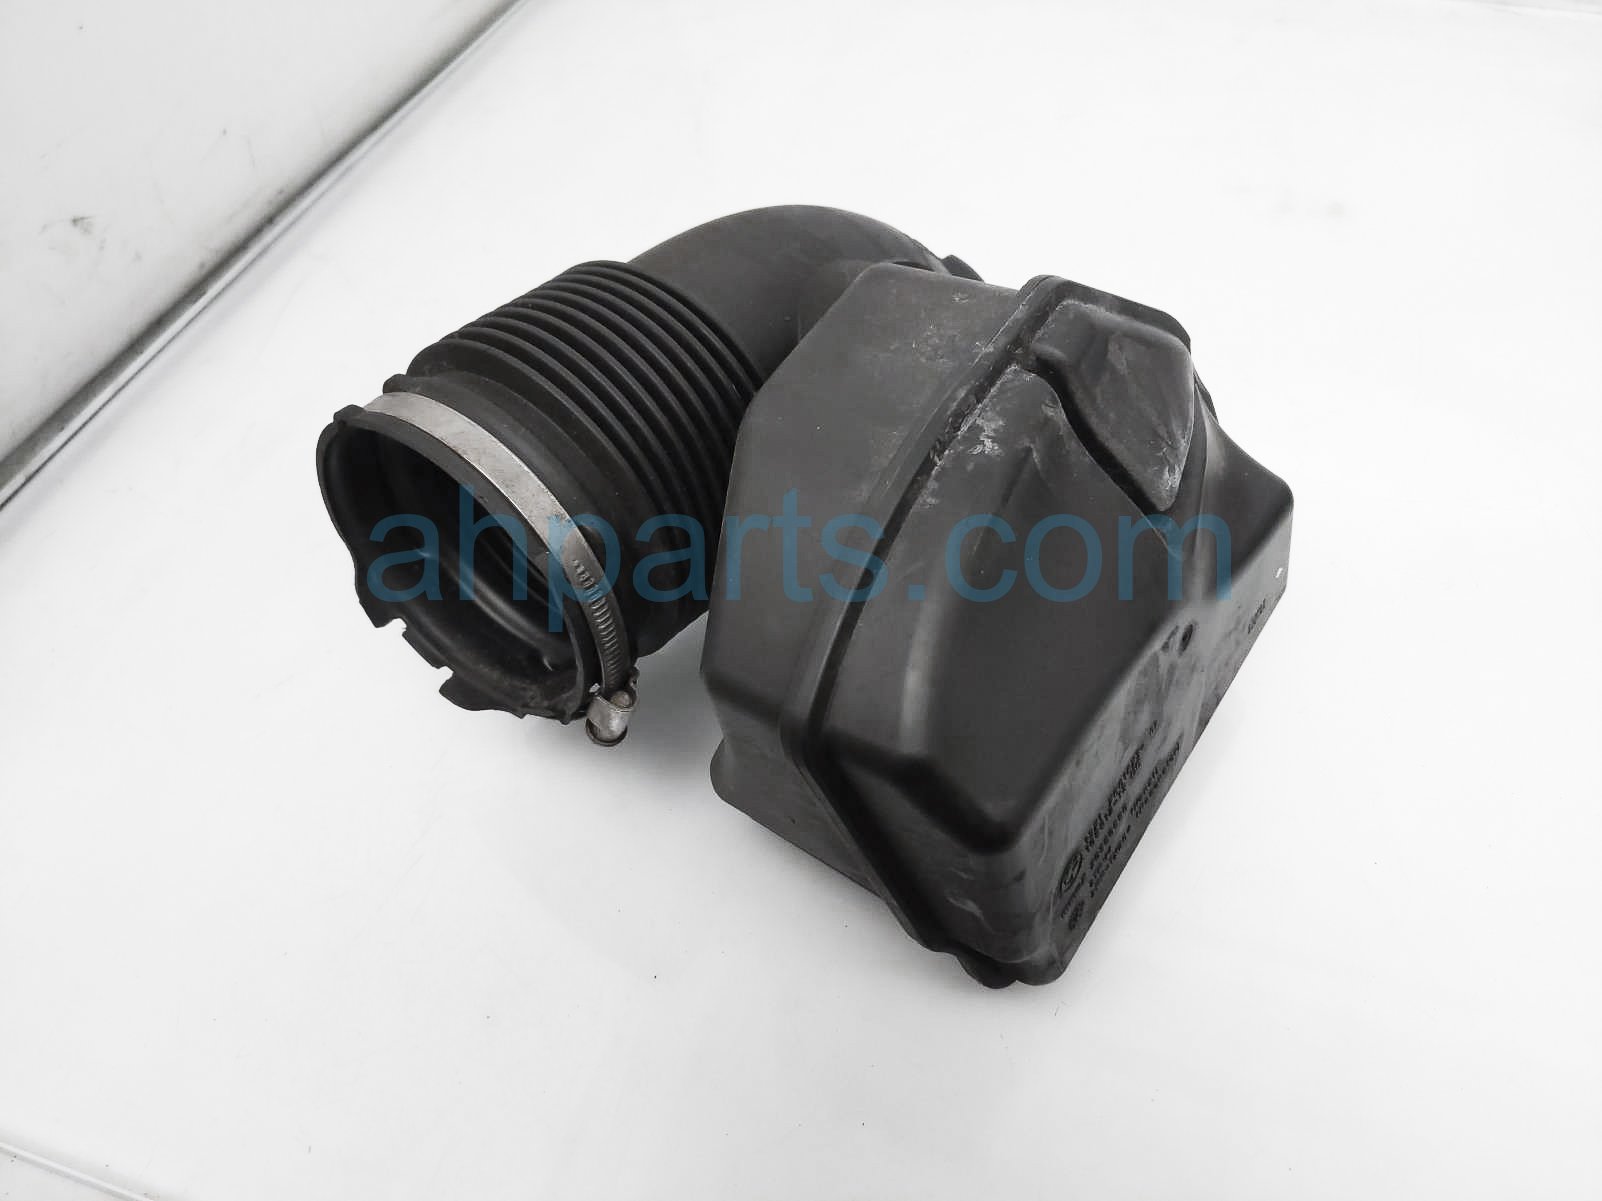 $40 BMW AIR CLEANER BOOT W/ RESONATOR